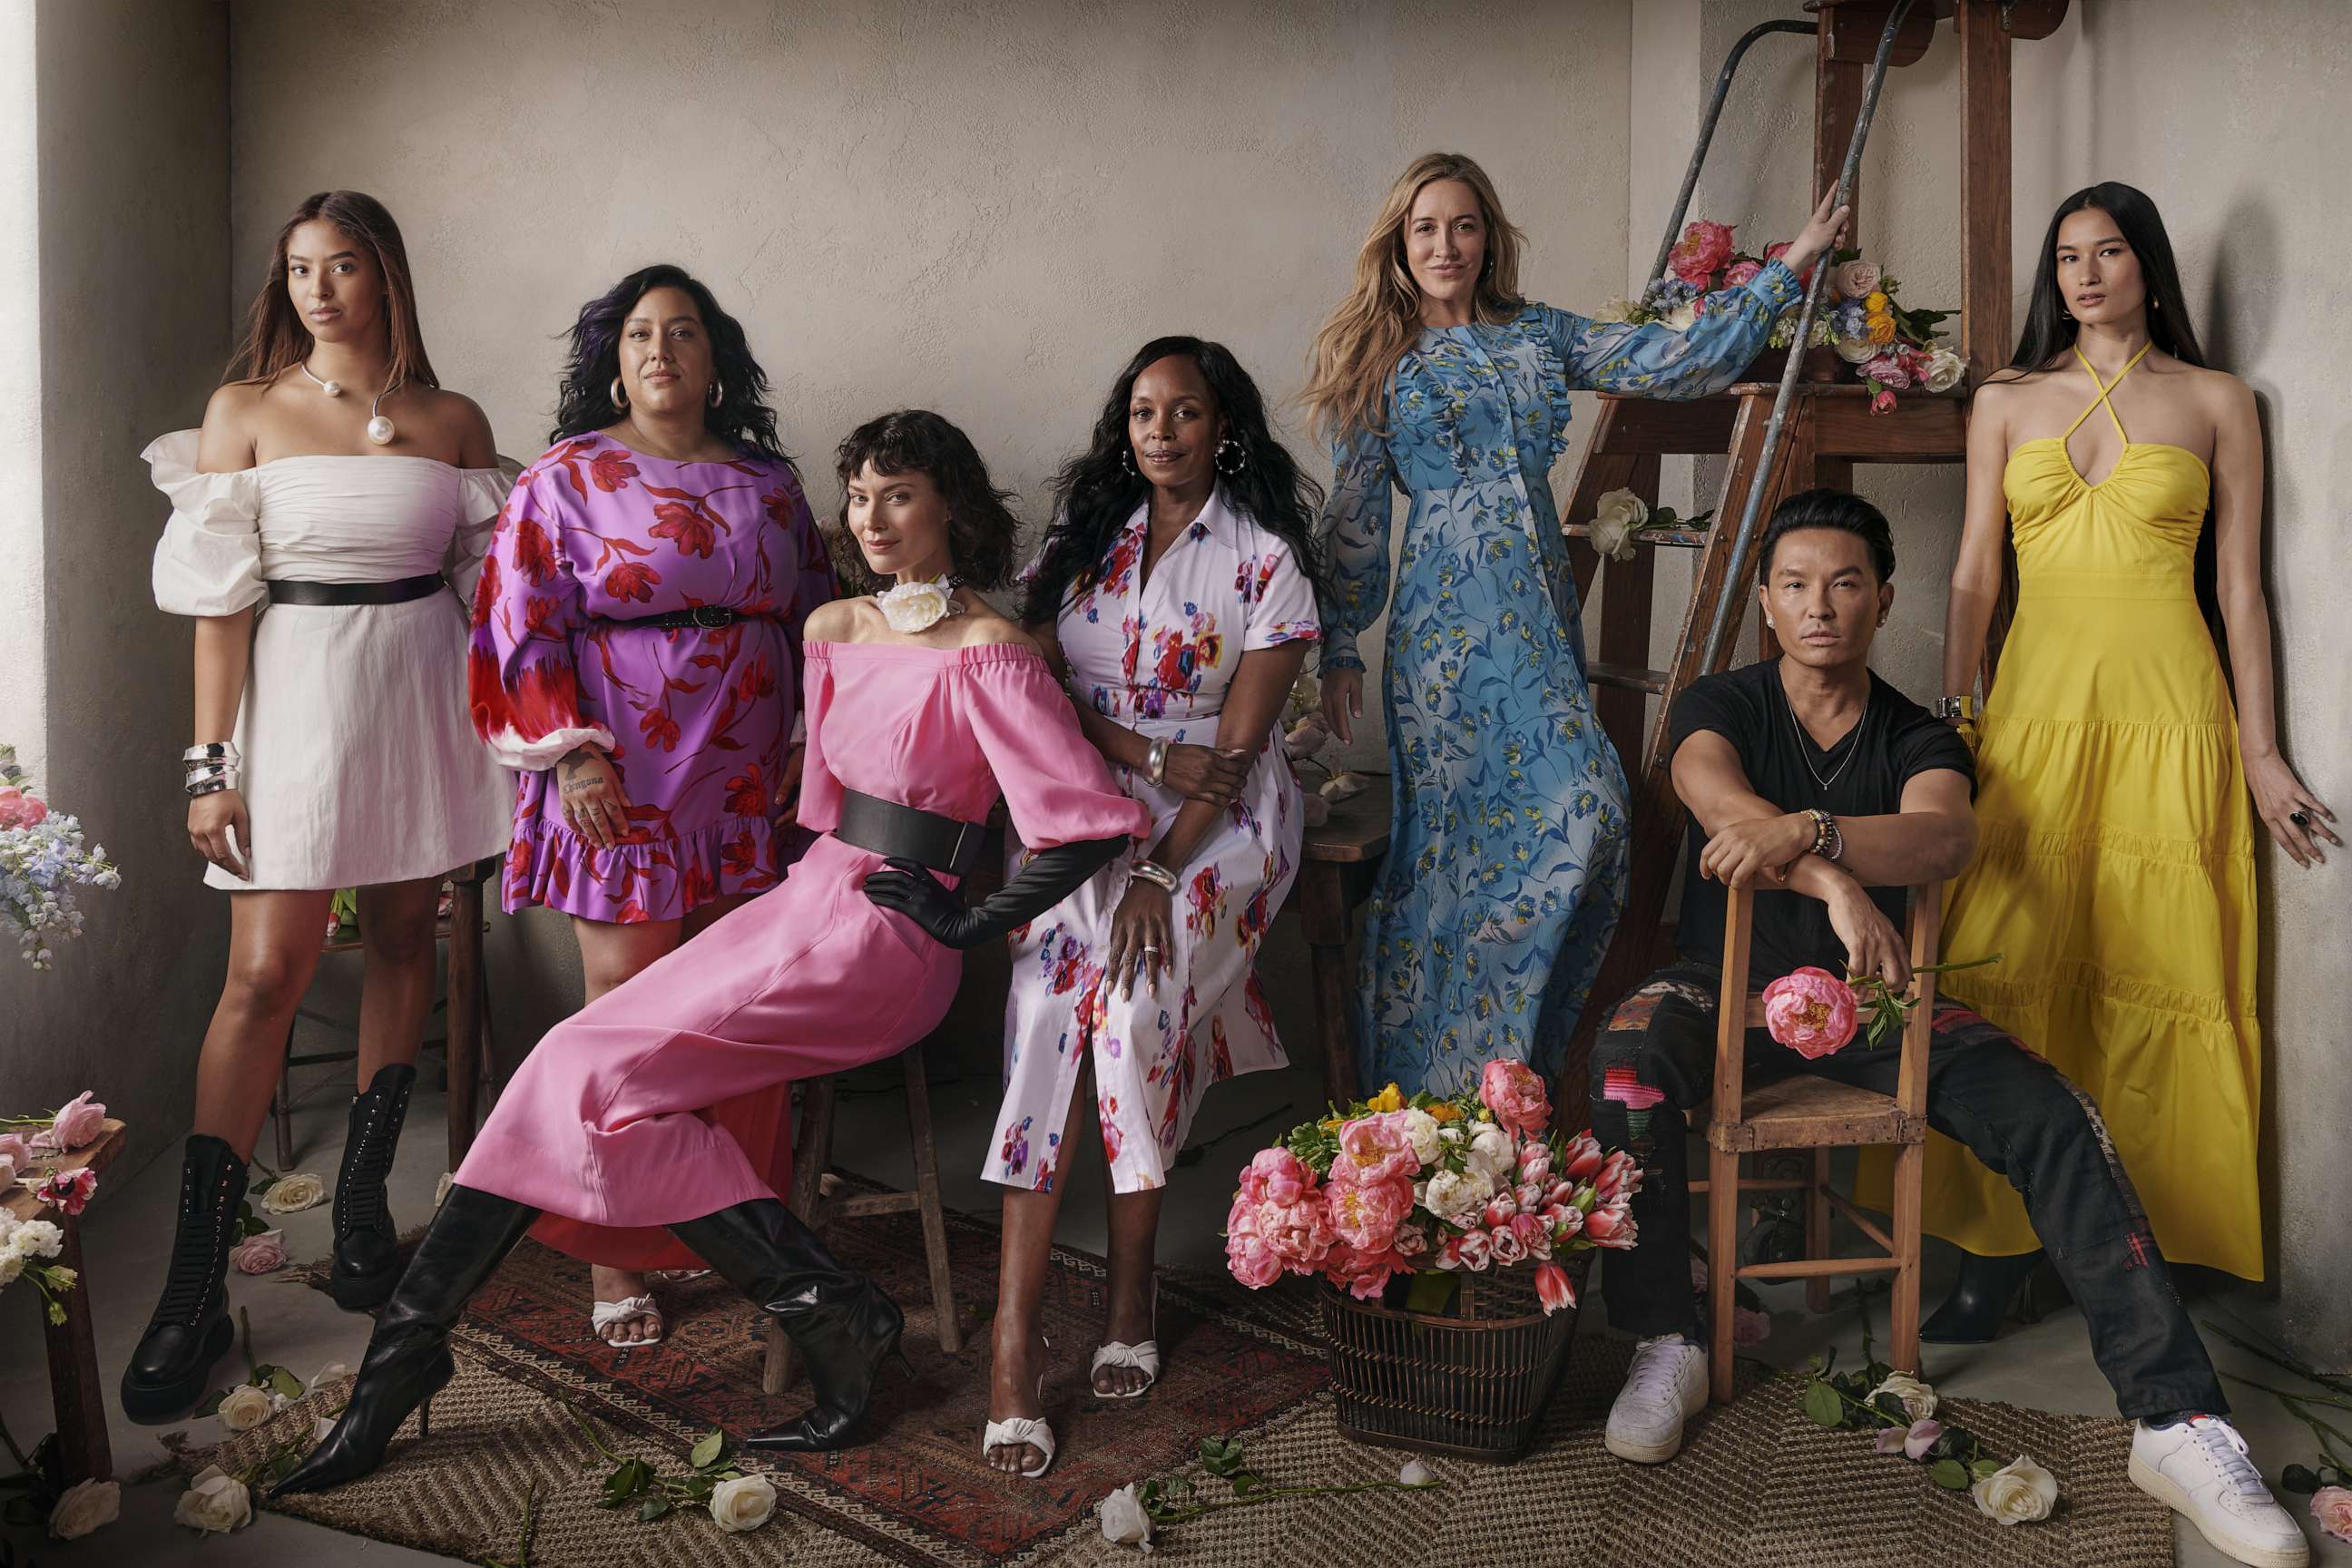 PHOTO: JCPenney is introducing an empowering new collaboration and collection by Prabal Gurung on March 2.